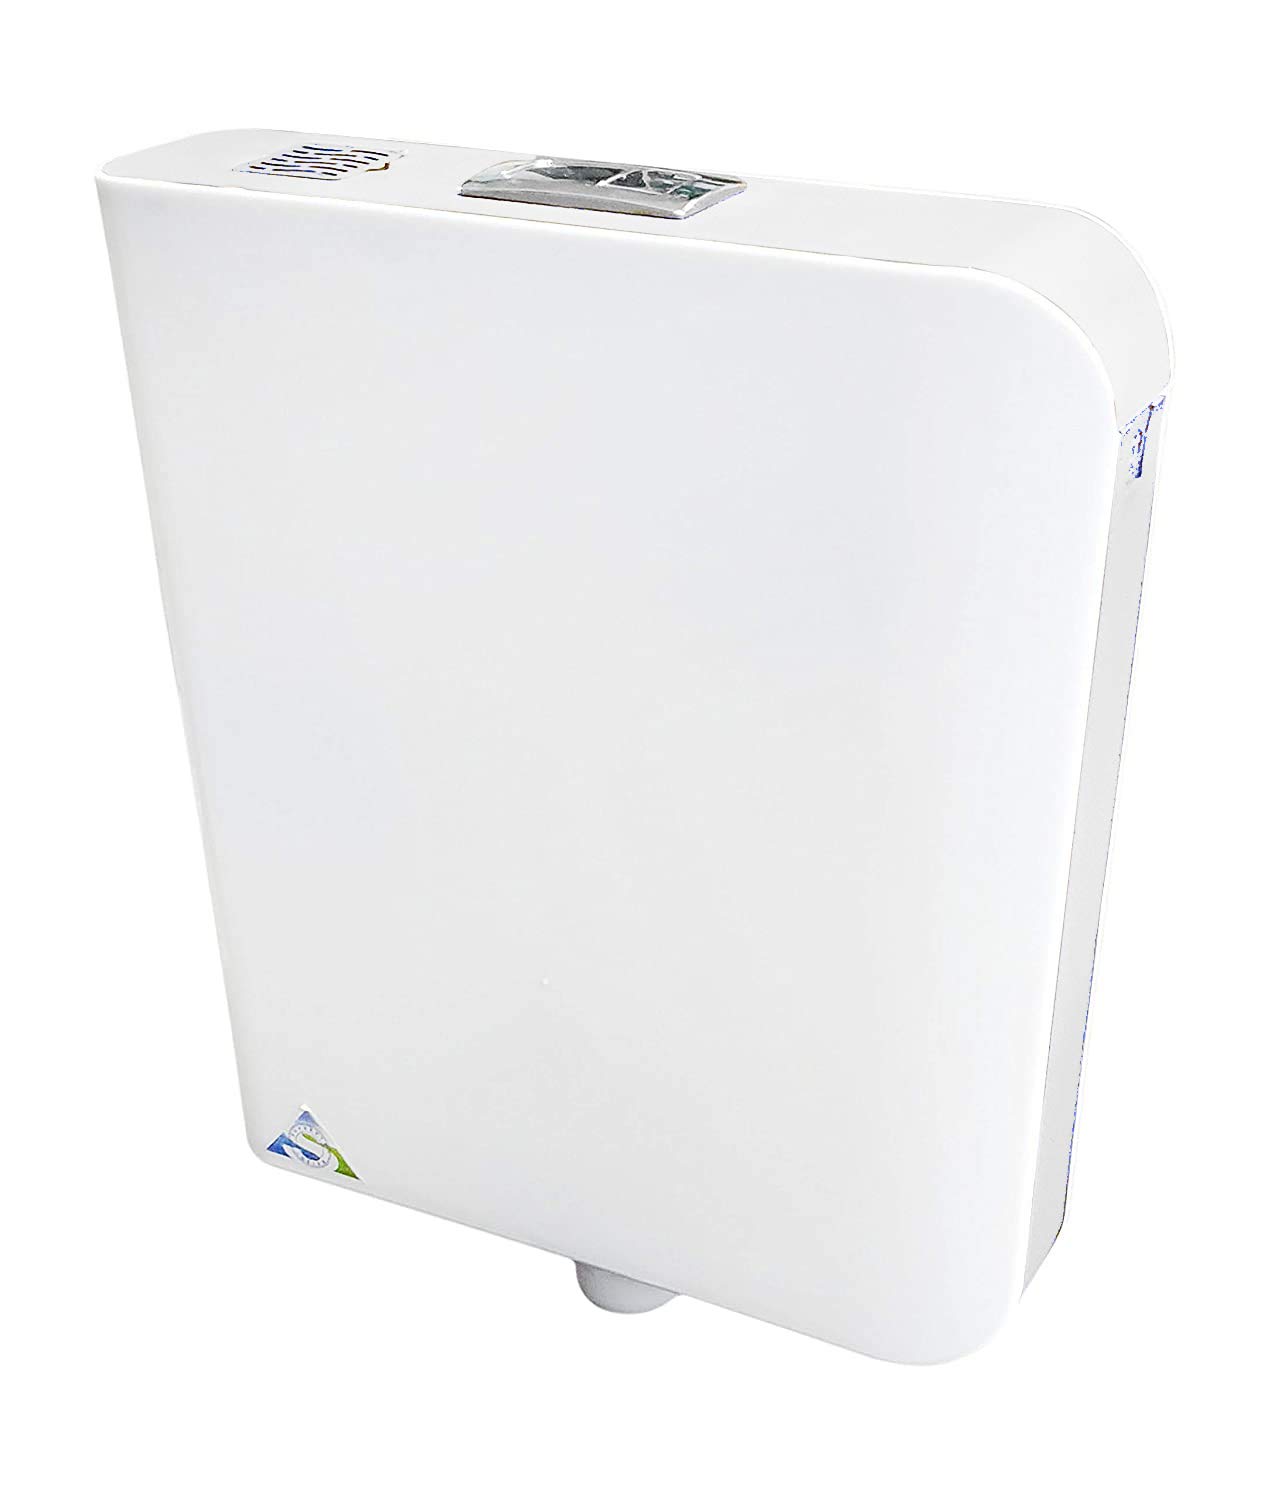 Aquieen Wall Mounted Double Flush Cistern with Provision for Air Freshner (White - Black)